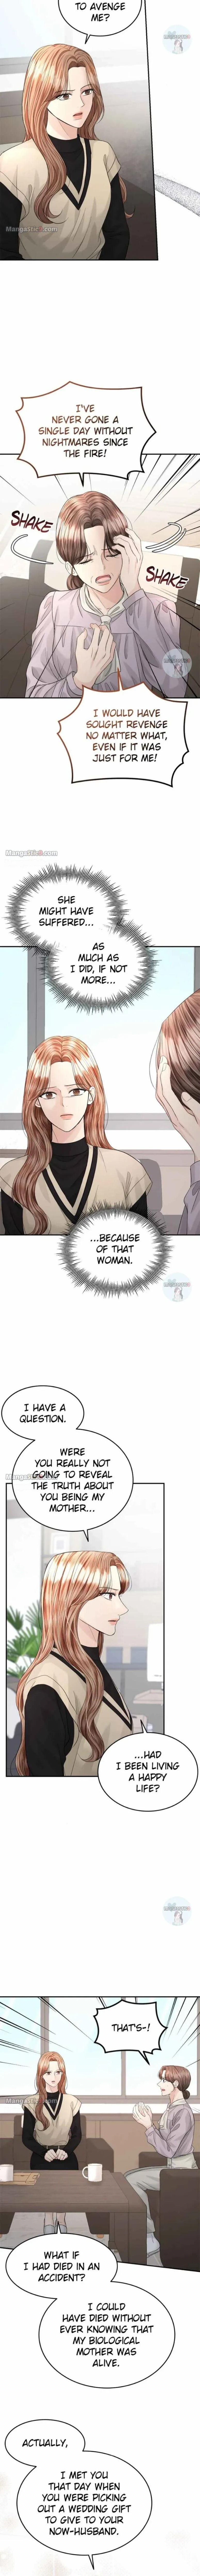 The Essence Of A Perfect Marriage Chapter 97 page 4 - Mangakakalot